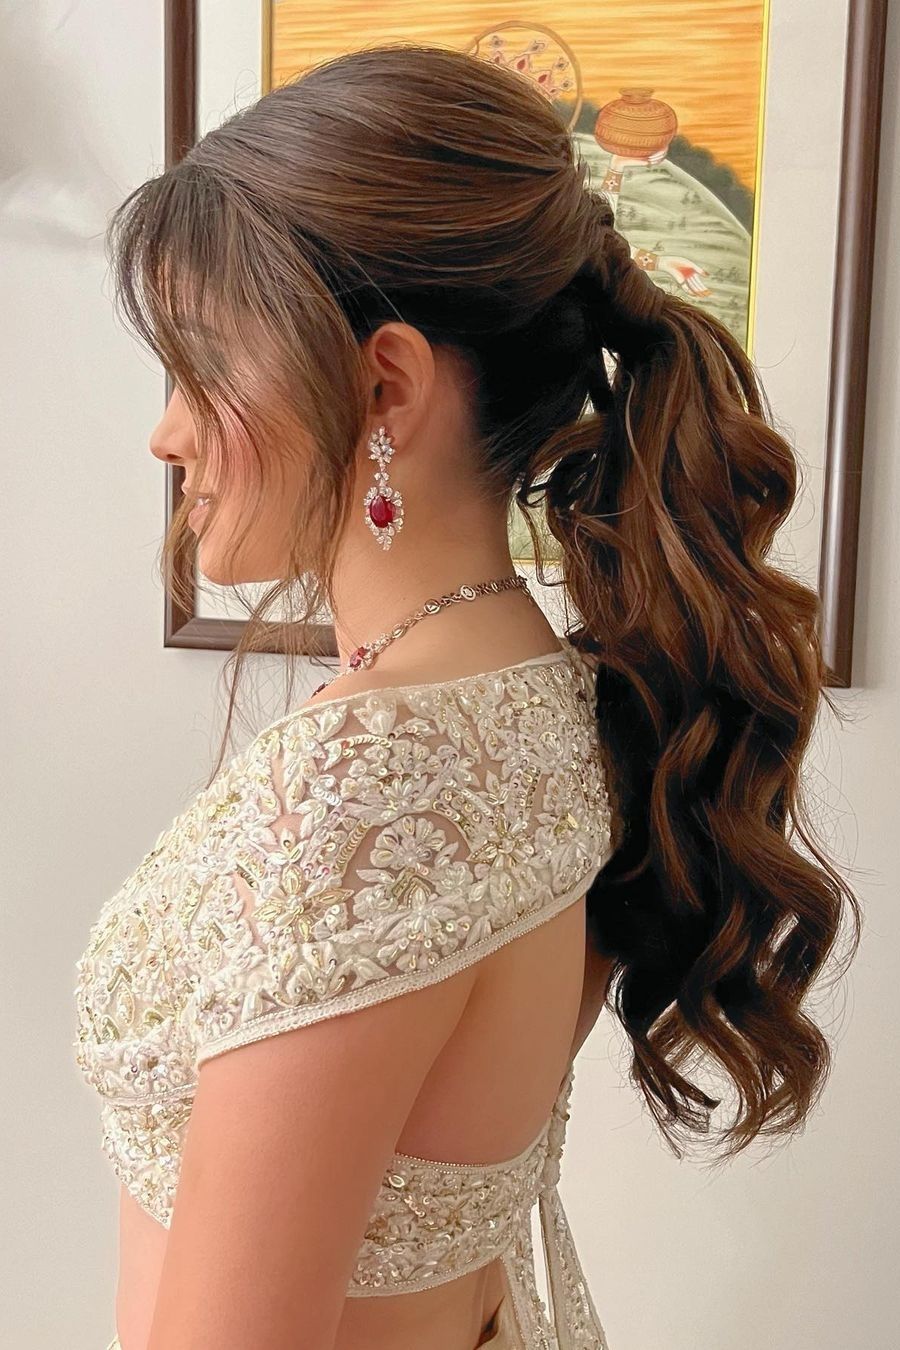 Stunning Hairstyles to Pair with Your Evening Gown